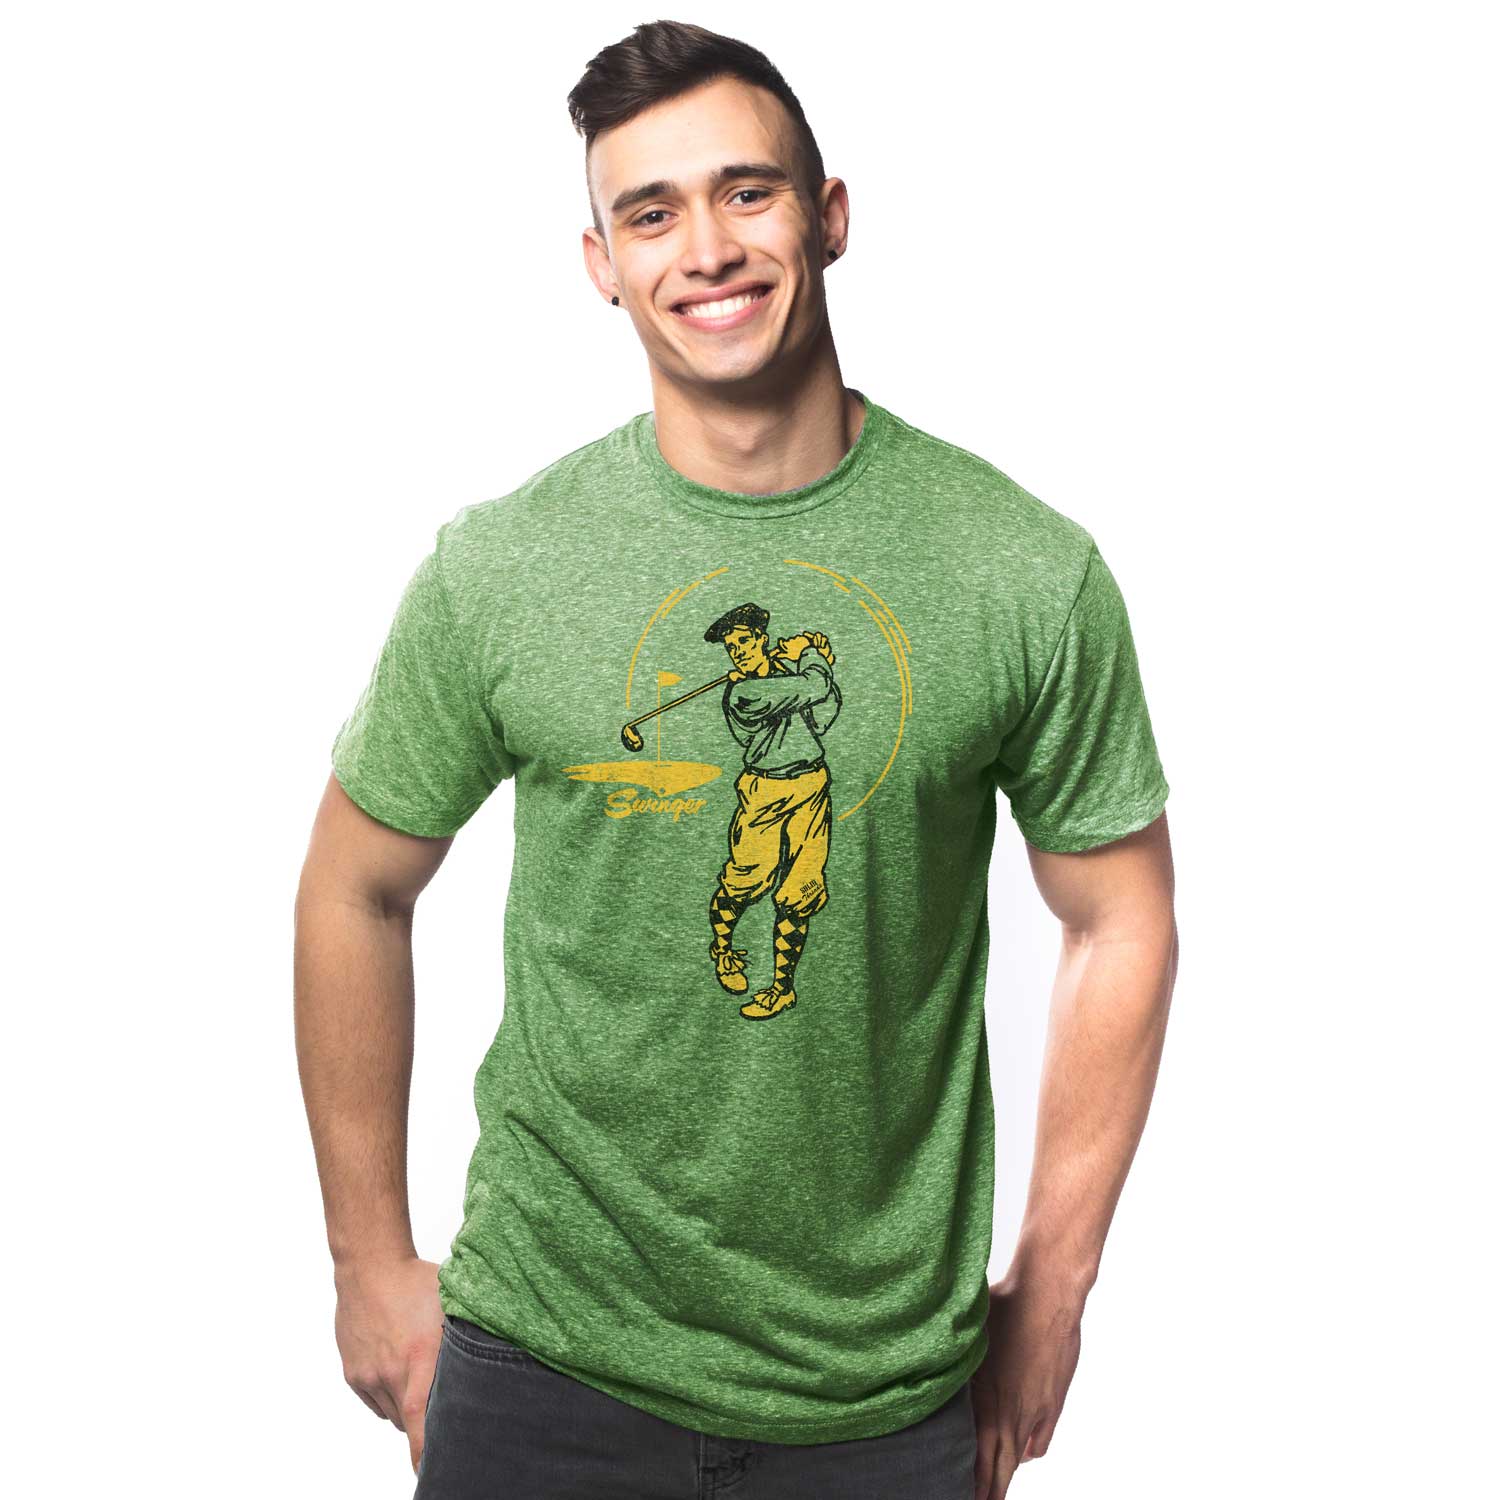 https://solidthreads.com/cdn/shop/products/mens_swinger_vintage_inspired_triblend_kelly_tee_shirt_shirt_with_cool_funny_retro_golfer_pun_graphic_on_model_solid_threads_1600x.jpg?v=1606090895